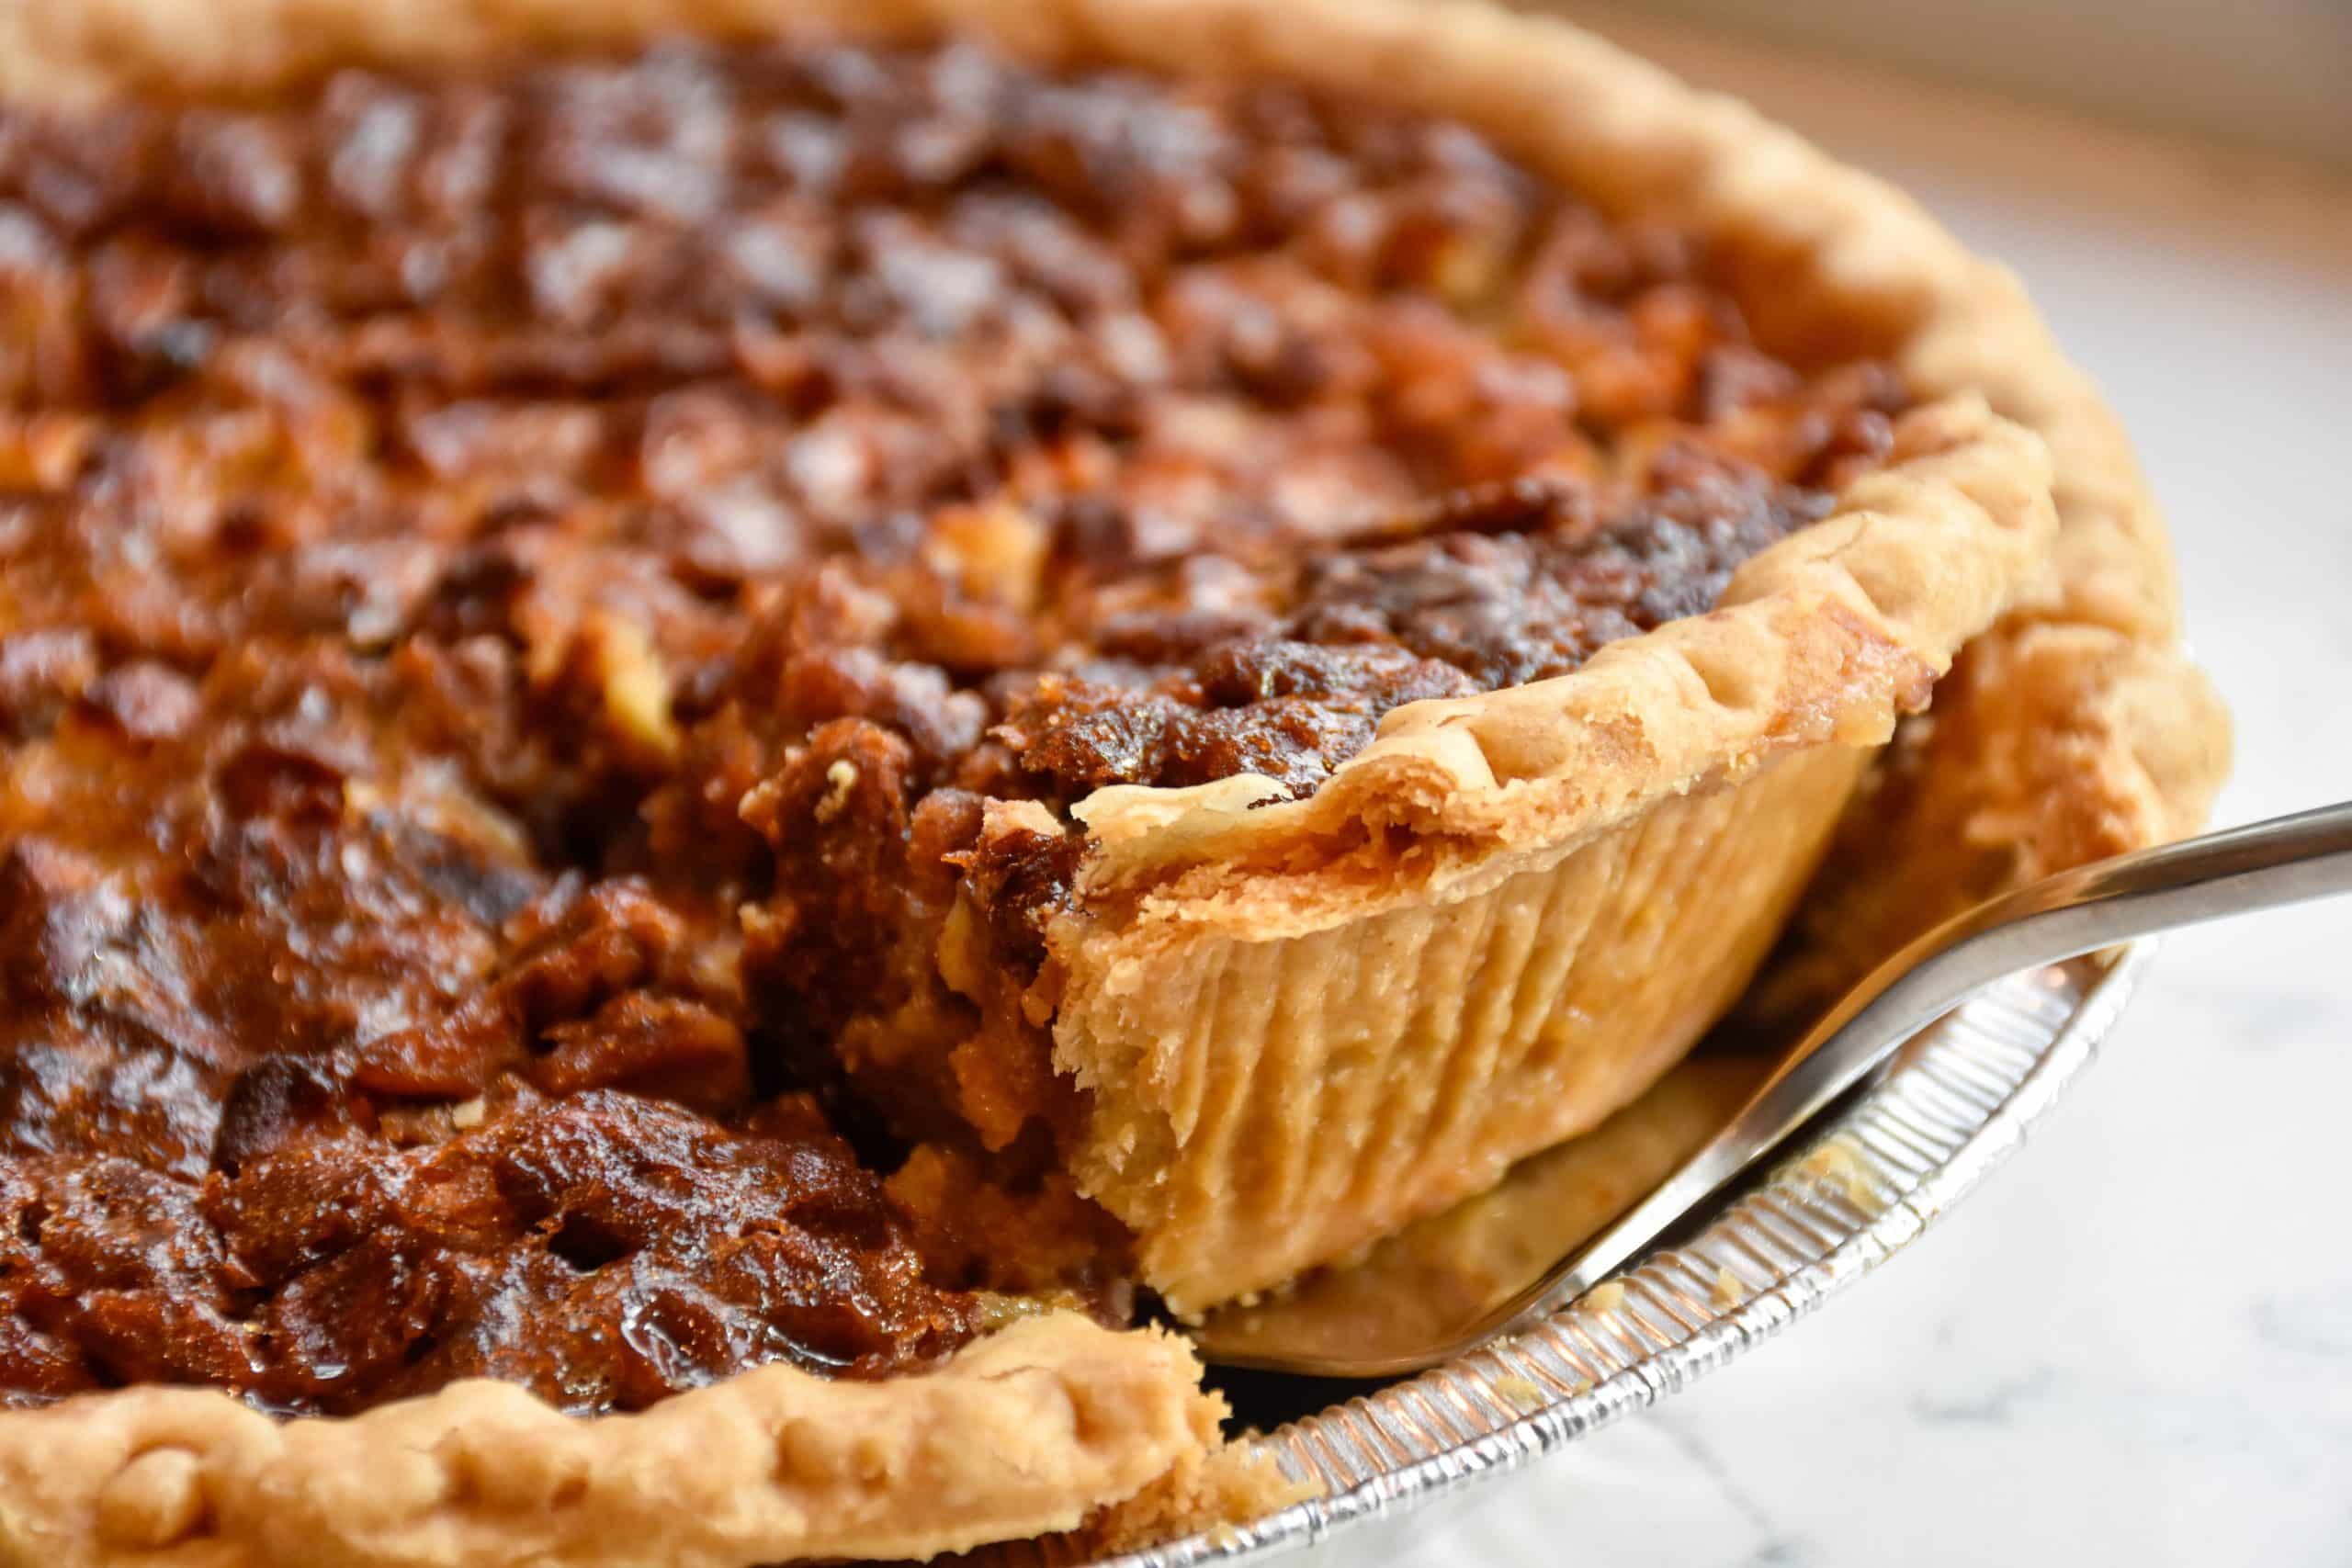 A photo of a pecan pie, which Trisha Yearwood messed up one Thanksgiving